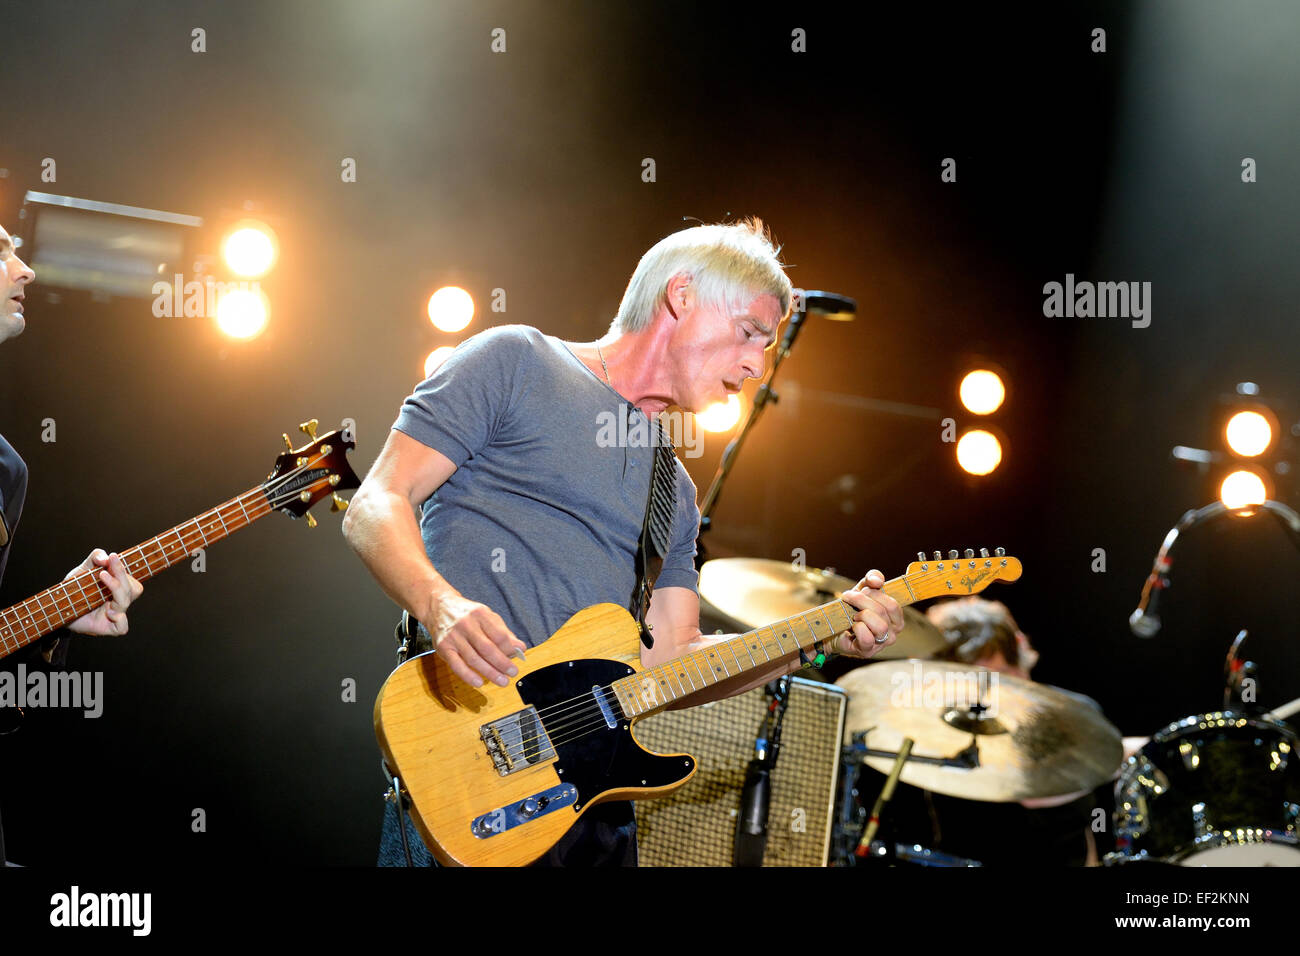 BENICASSIM, SPAIN - JULY 18: Paul Weller (English singer, songwriter and musician) performs at FIB Festival. Stock Photo